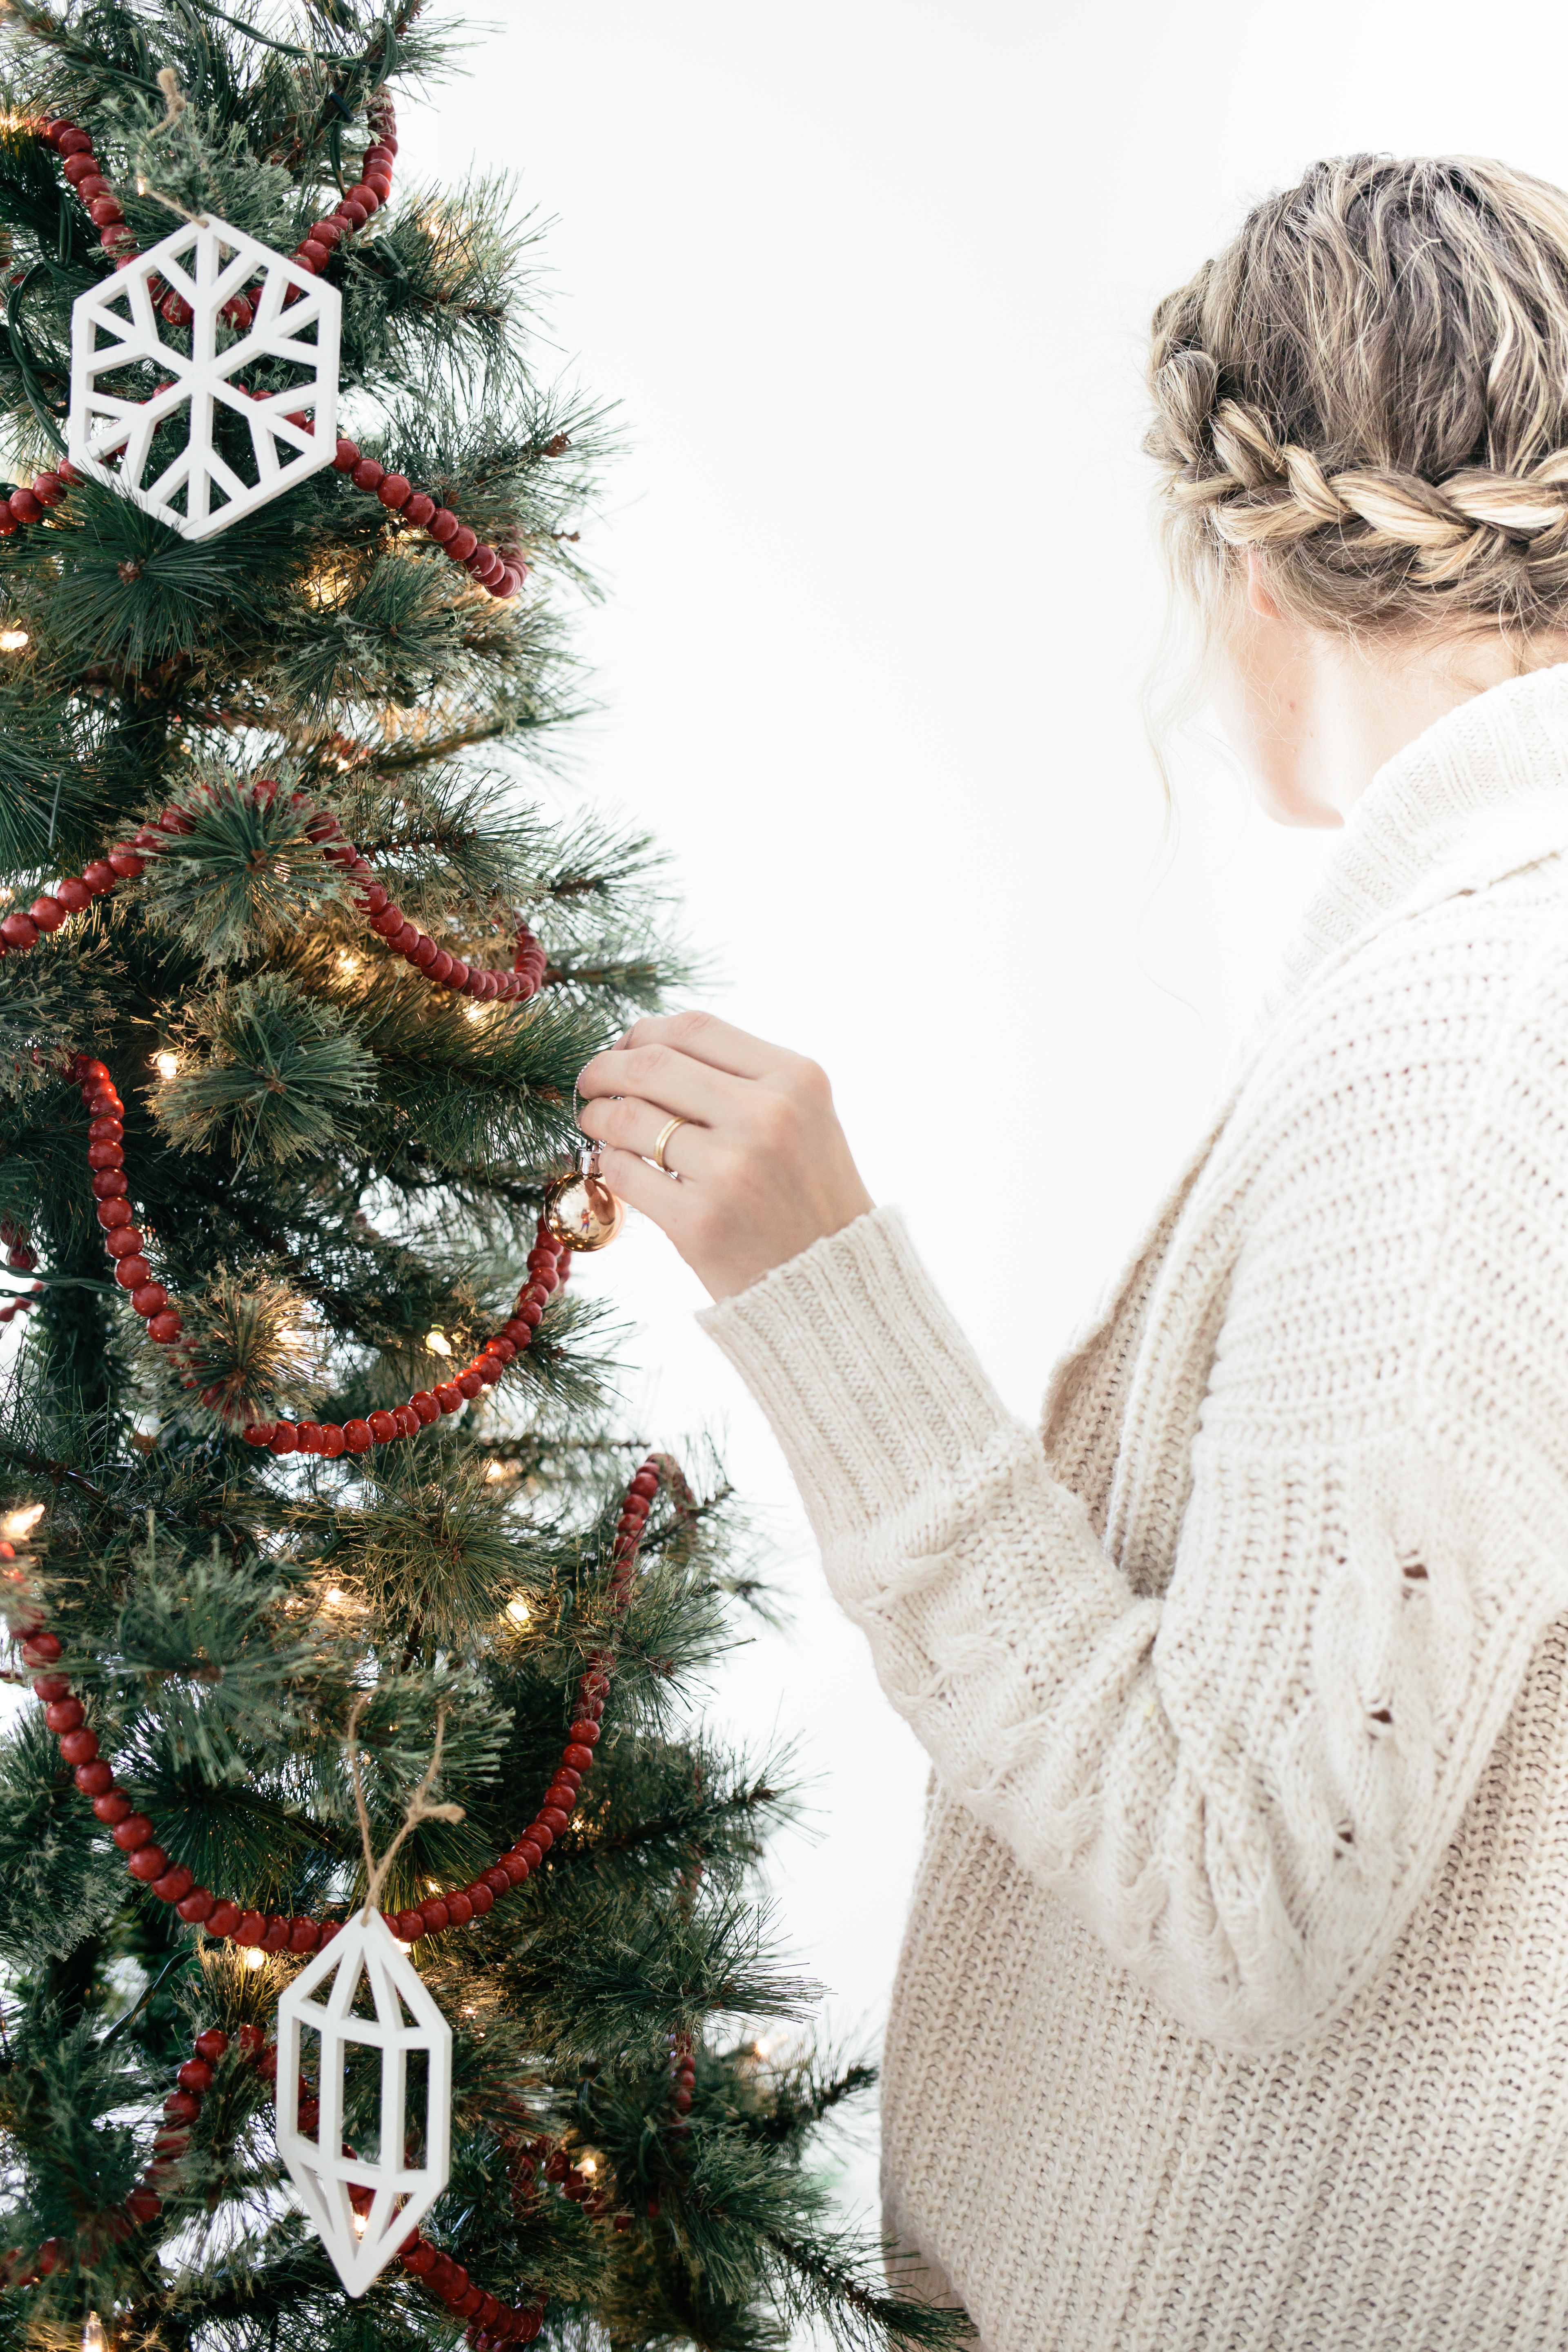 5 Christmas Ornament Traditions-Christmas-Ornament-Traditions